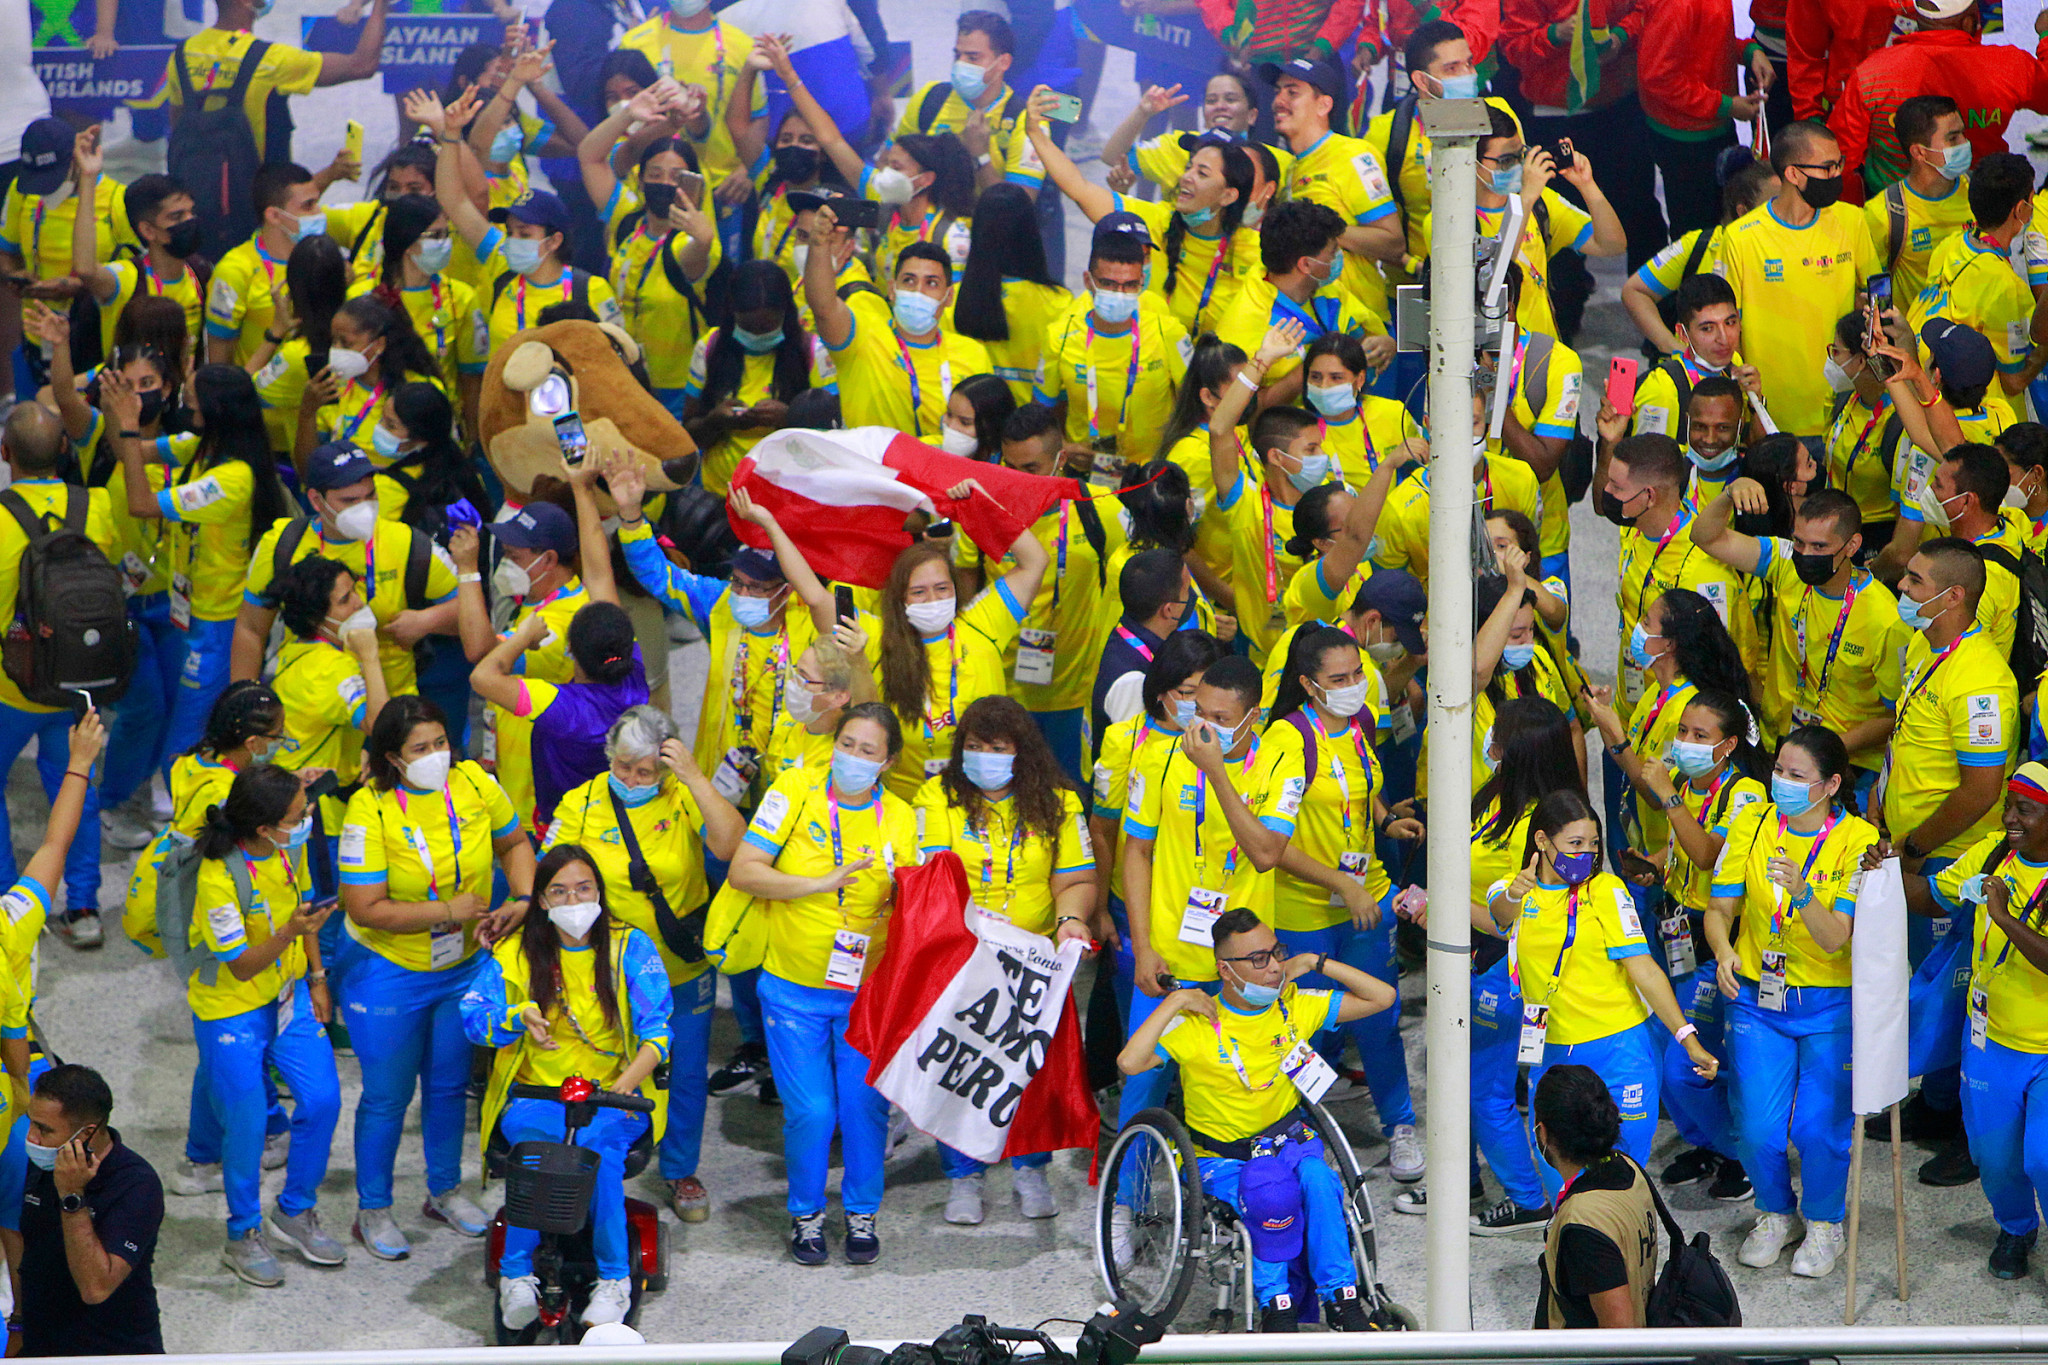 The volunteers of the Junior Pan American Games were celebrated at the Closing Ceremony ©Agencia.Xpress Media